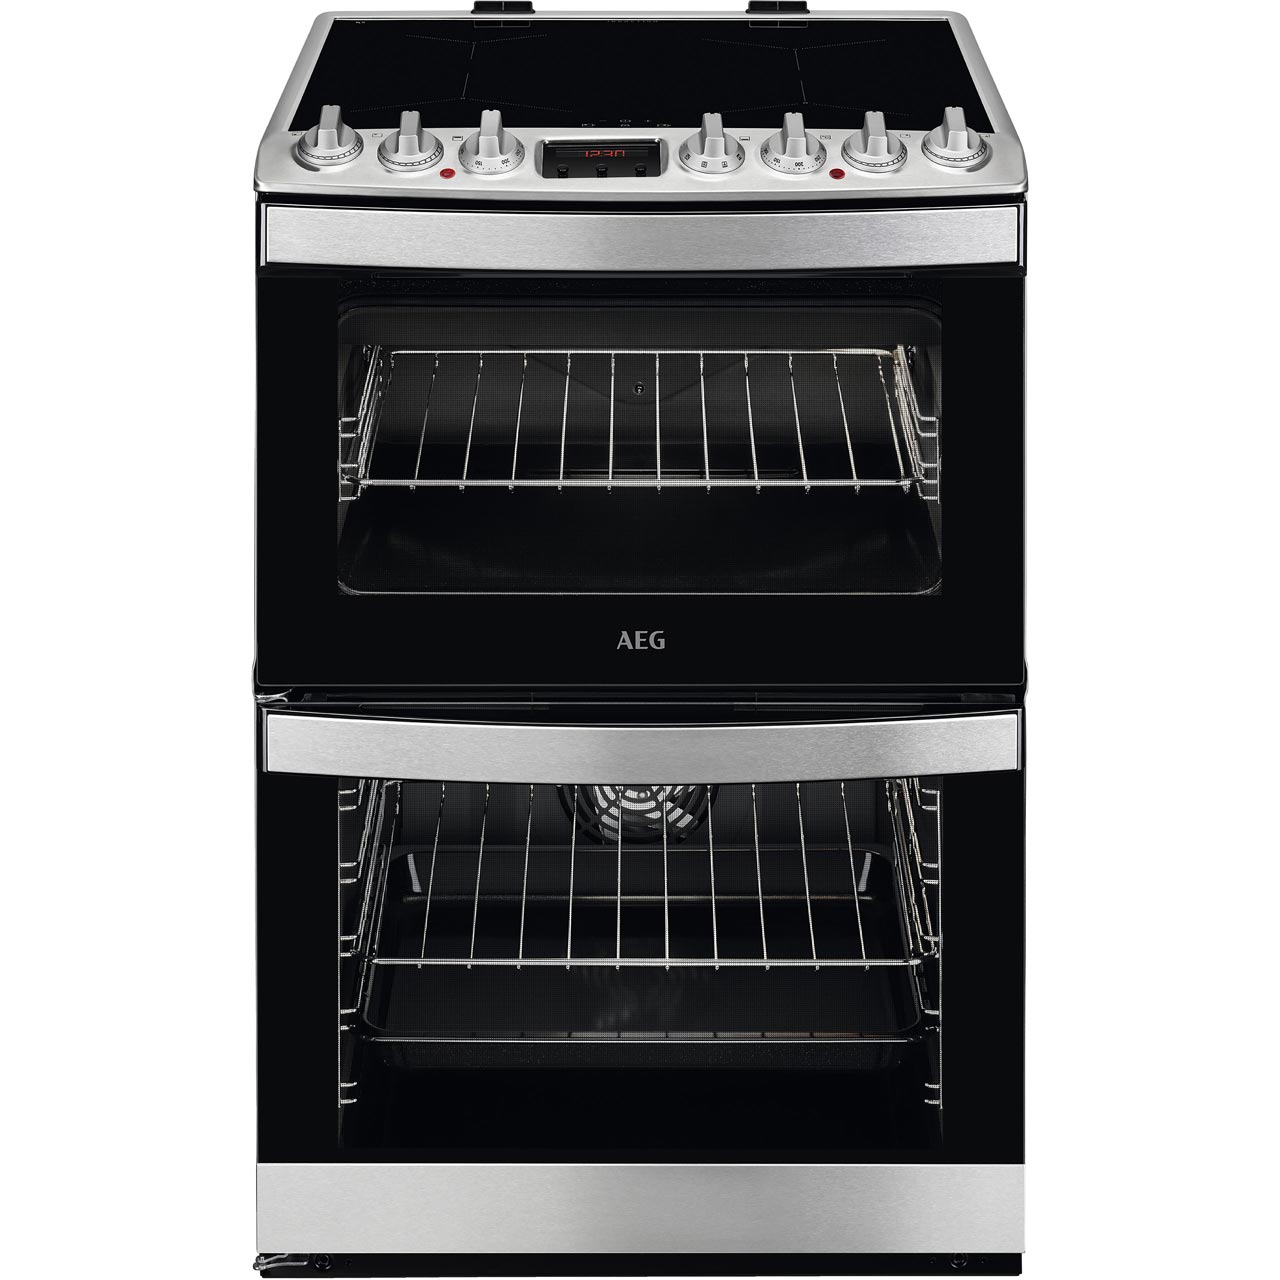 AEG CIB6731ACM 60cm Electric Cooker with Induction Hob Review